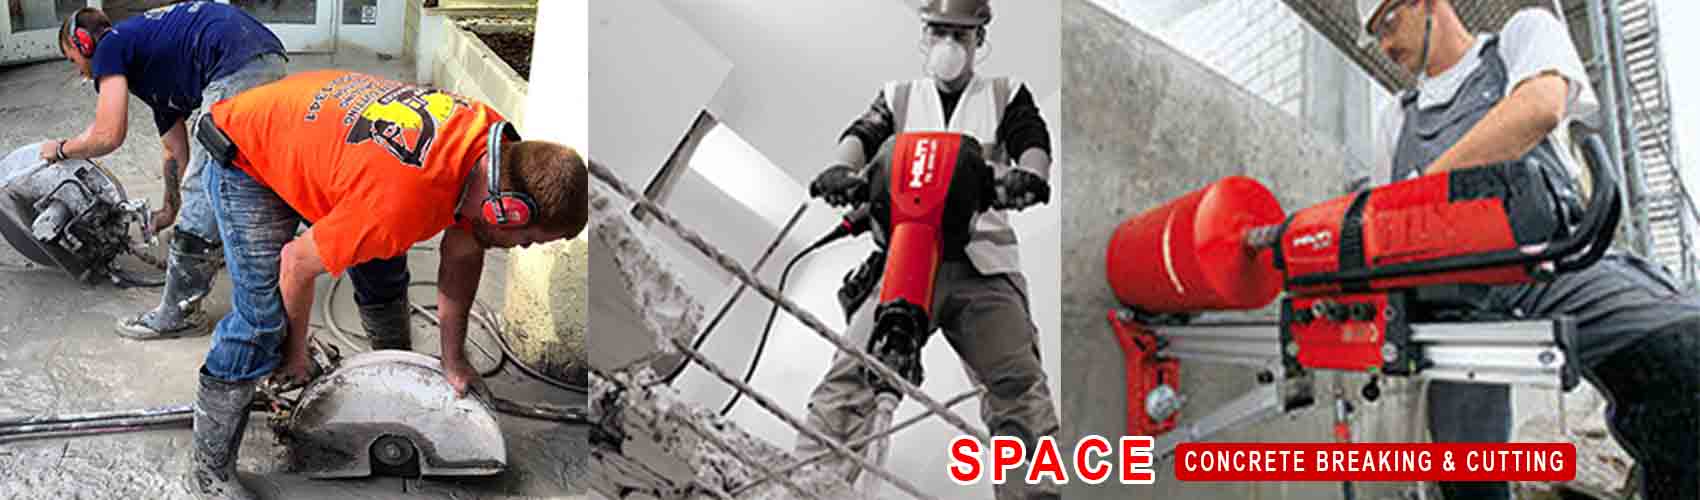 Space Construction Solutions